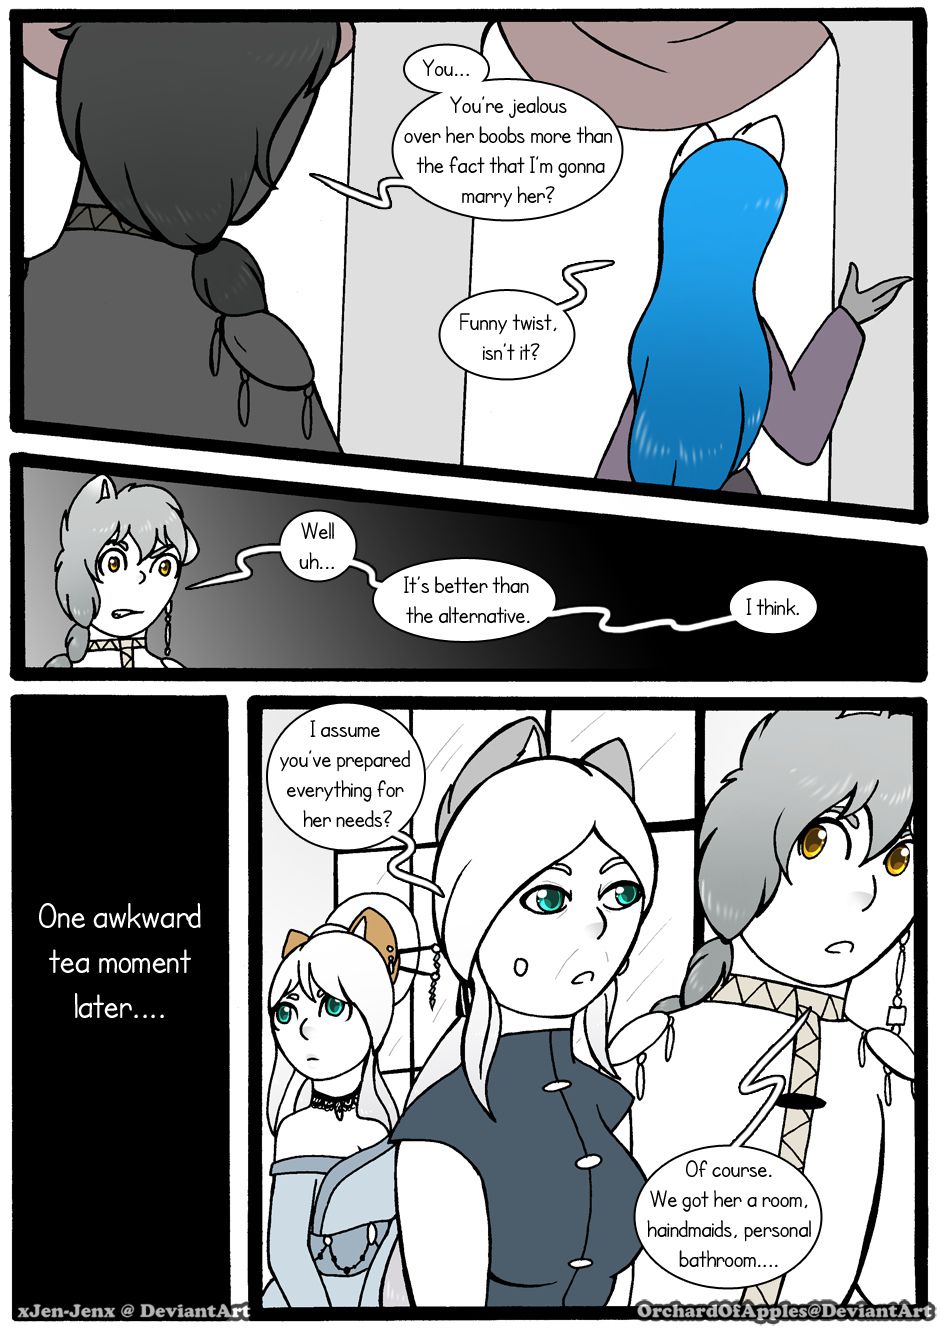 [Jeny-jen94] Between Kings and Queens [Ongoing] 198